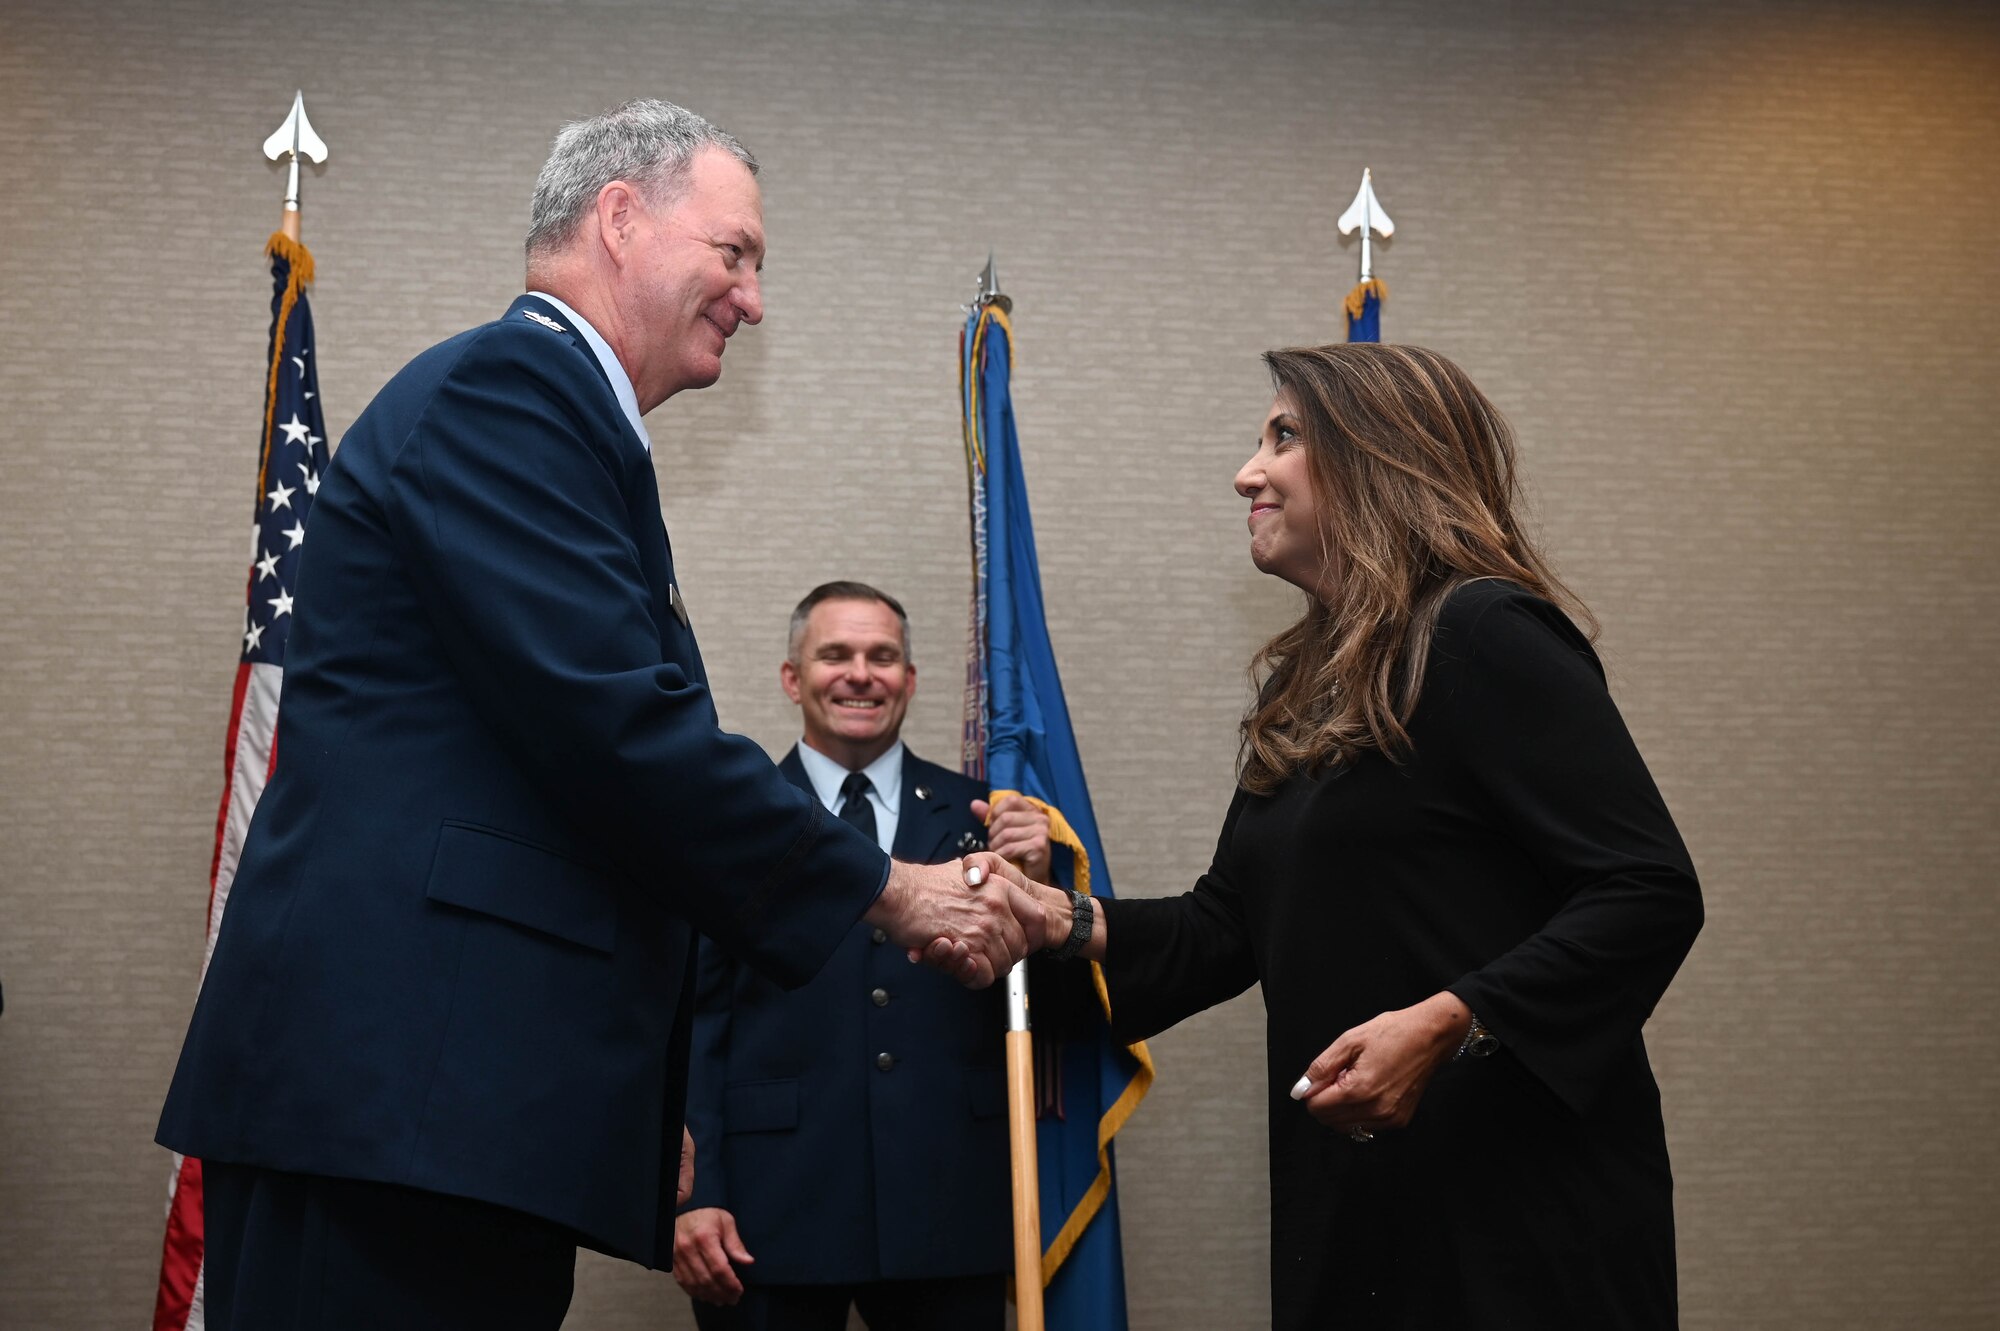 Col. Terry McClain, 433rd Airlift Wing commander, and Bianca Rhodes, Knight Aerospace president and CEO, shake hands during the 433rd AW Honorary Commanders’ Induction Ceremony in San Antonio, July 9, 2022. The ceremony included each honorary commander receiving an Air Force commander’s insignia pin and assuming honorary command by accepting the 433rd AW guidon. (U.S. Air Force photo by Senior Airman Brittany Wich)